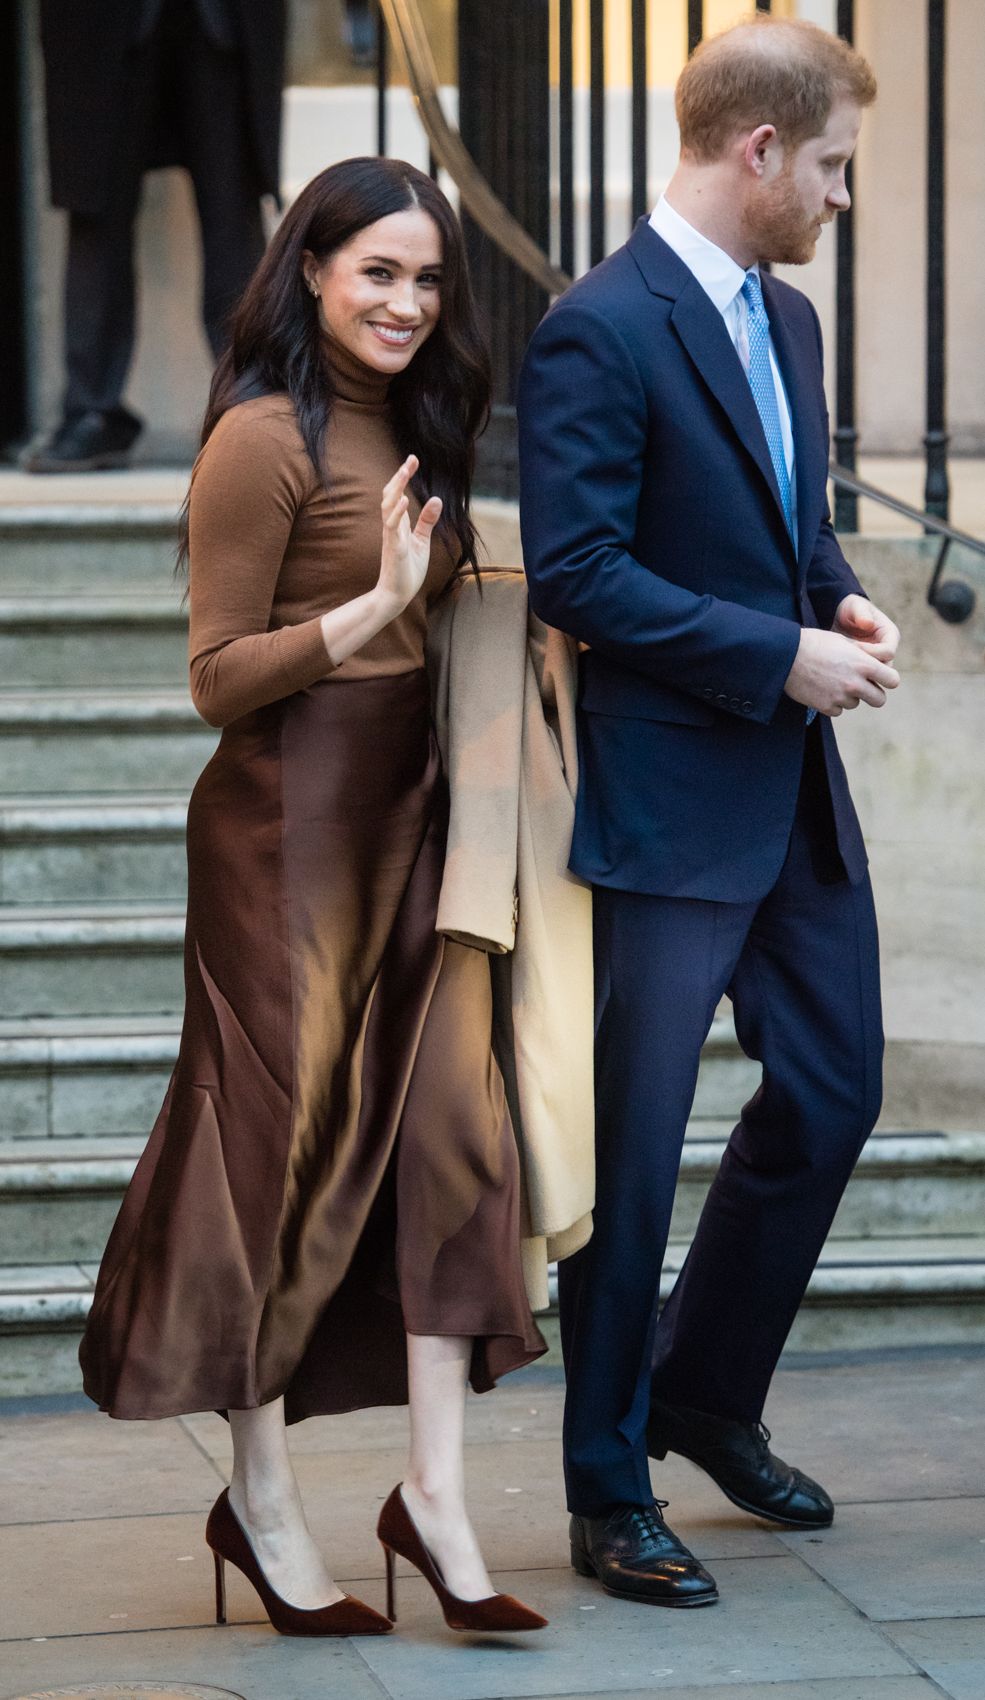 You can now buy Meghan Markle's favourite high street brand in